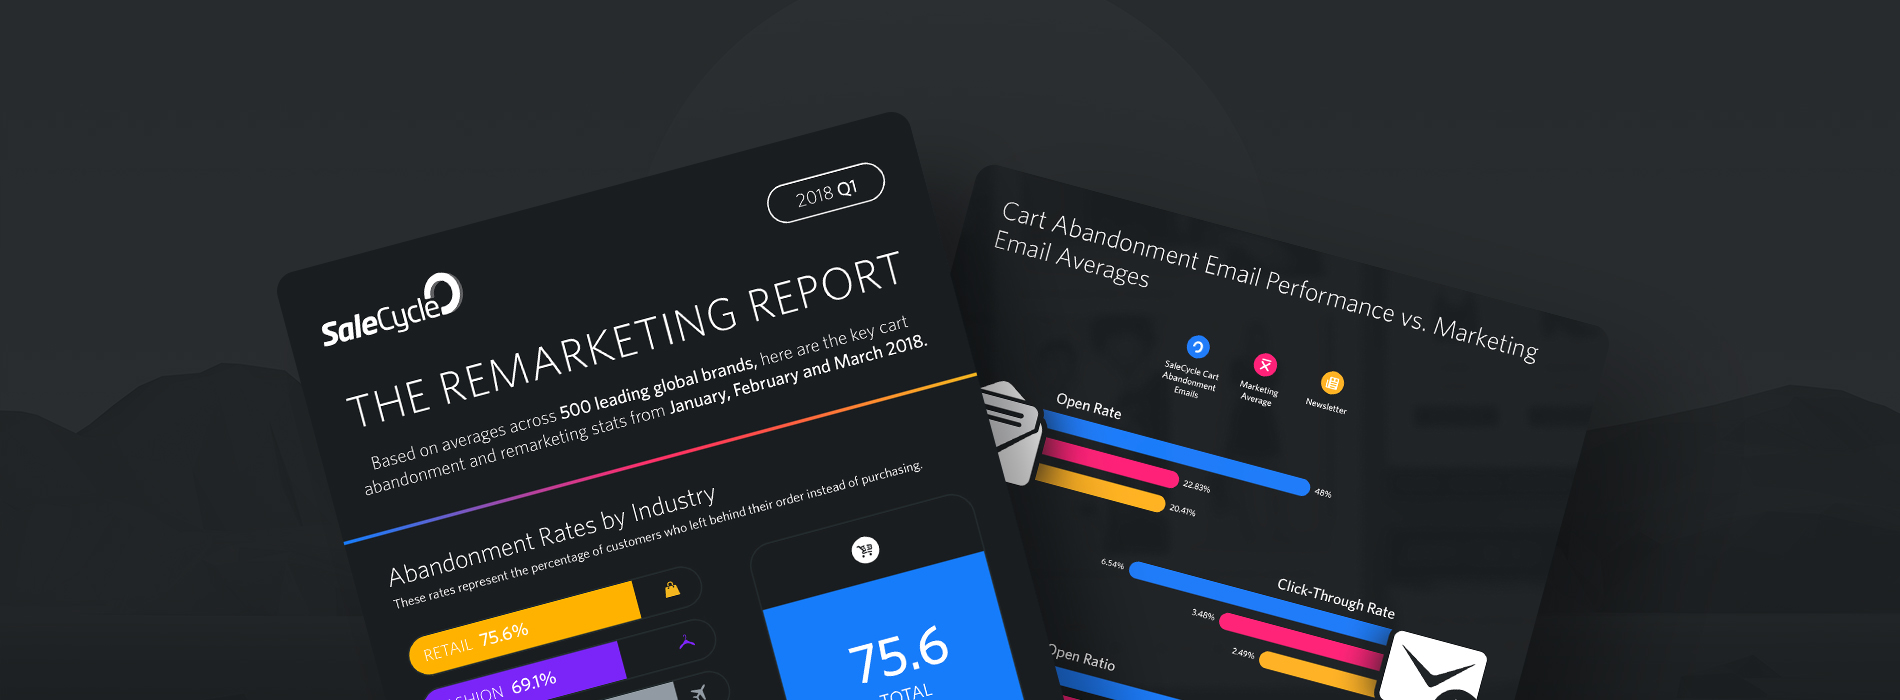 [Infographic] The Remarketing Report – Q1 2018